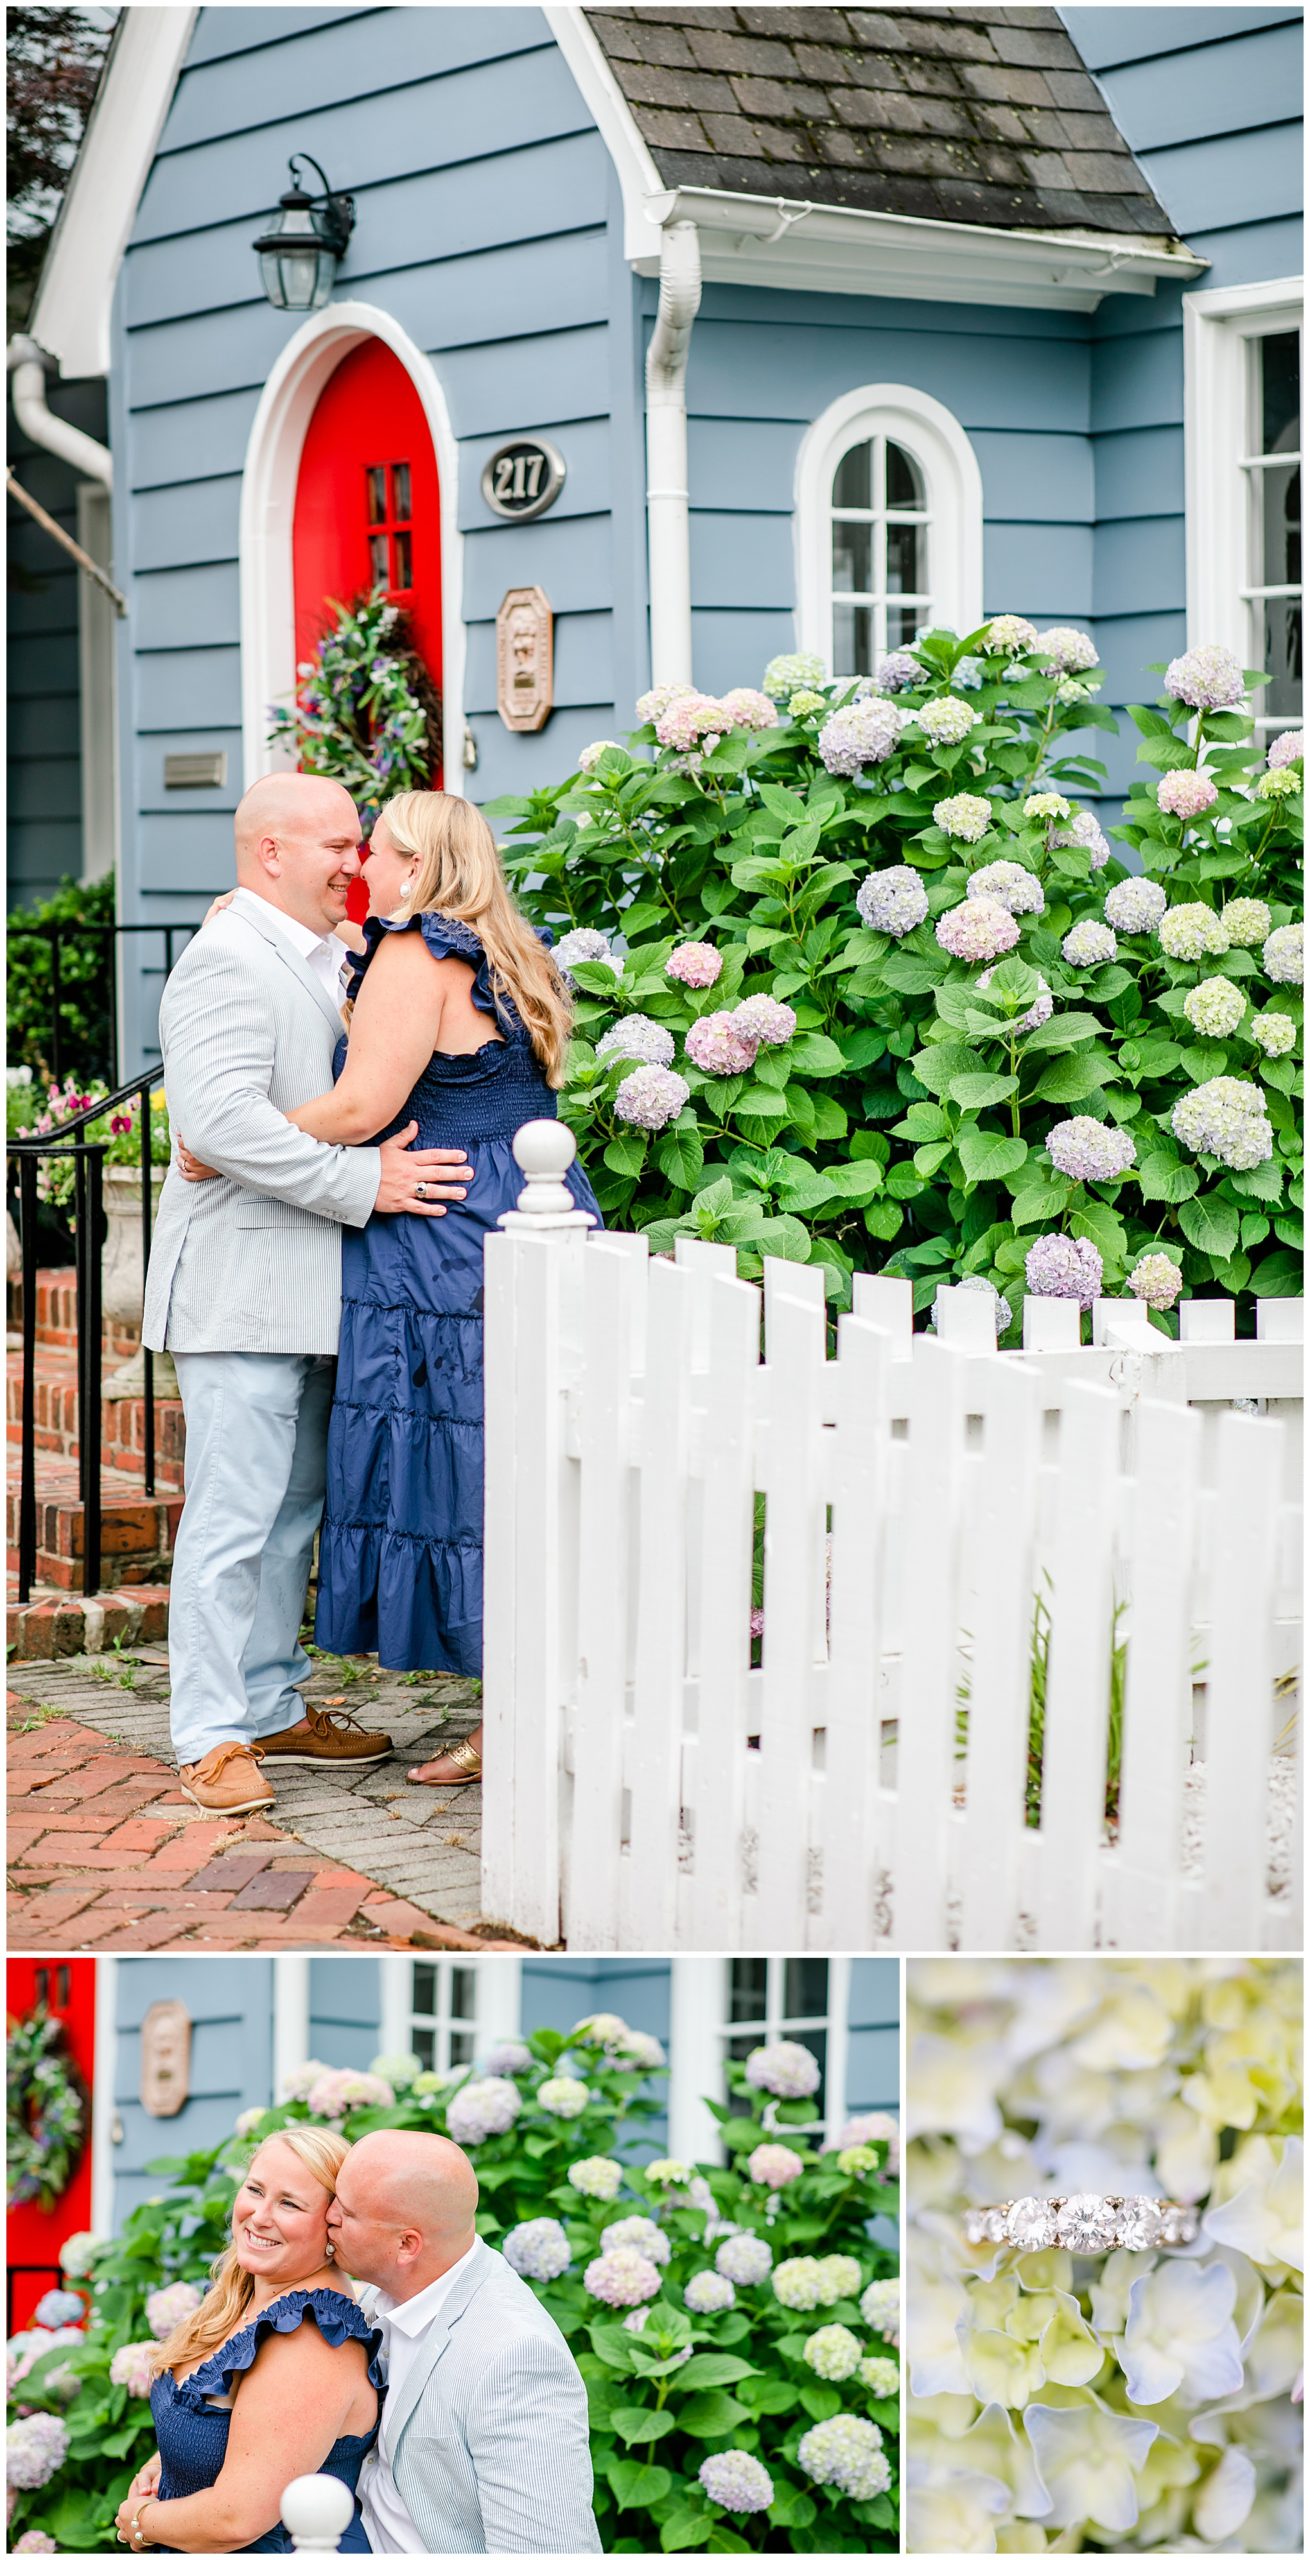 late spring Annapolis engagement photos, nautical engagement photos, Annapolis Maryland, Maryland engagement photos, MD wedding photographer, MD engagement photos, all American engagement photos, downtown Annapolis engagement photos, Annapolis photographer, Rachel E.H. Photography, summer engagement photos, red white and blue aesthetic, spring engagement photos, five stone engagement ring